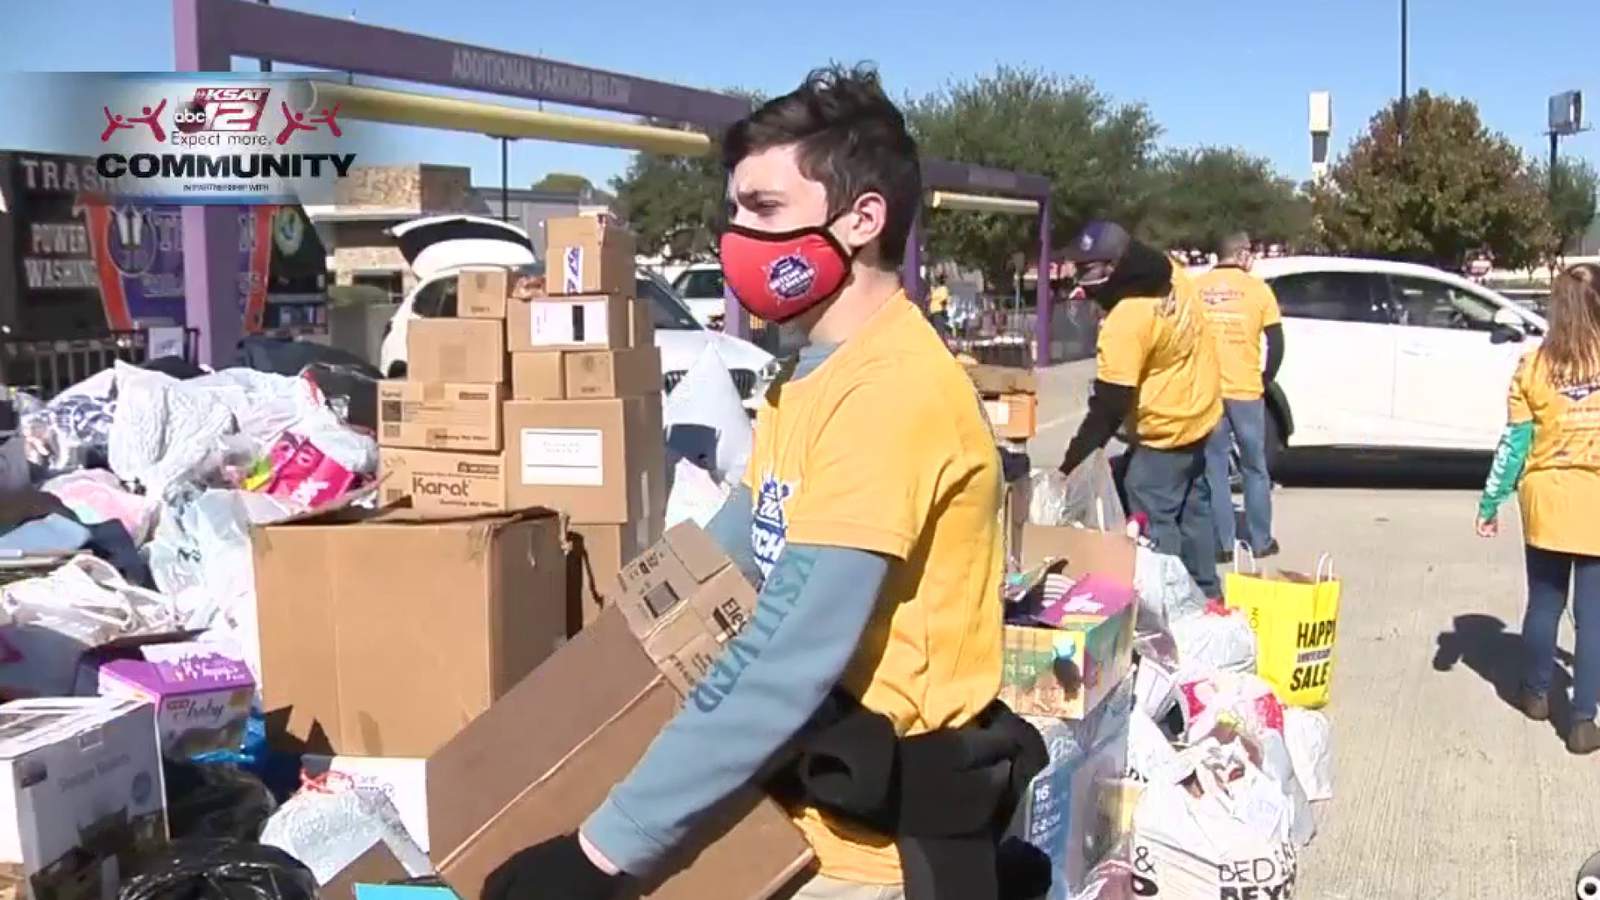 Gotcha Covered Collection Drive receives over 1,000 pounds of donations